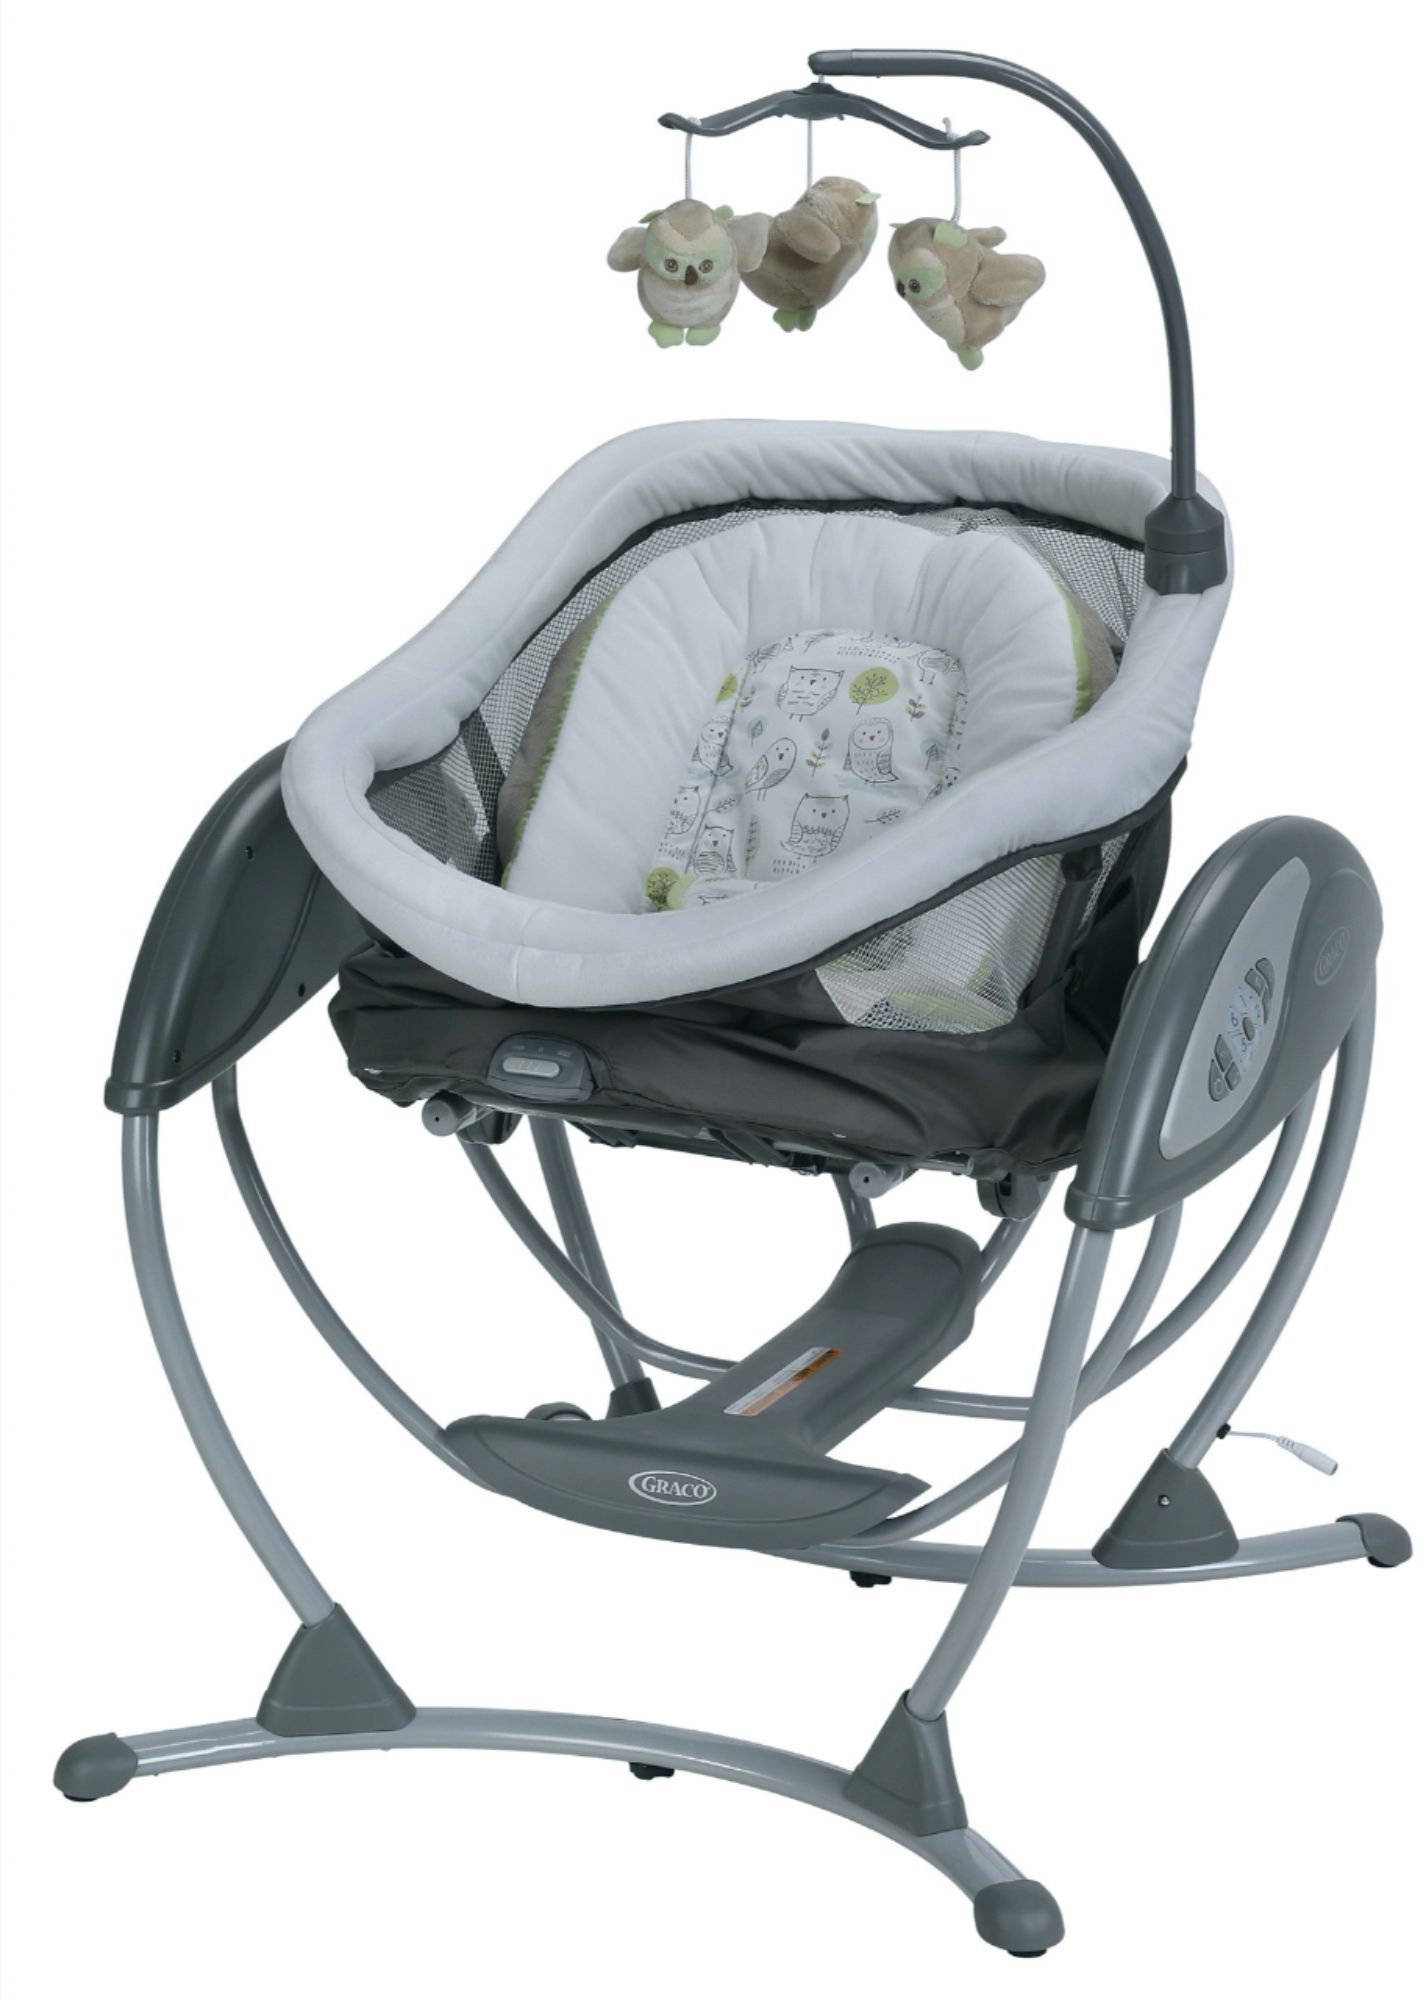 Angle View: Fisher-Price Infant-to-Toddler Rocker - Pacific Pebble, Baby Seat